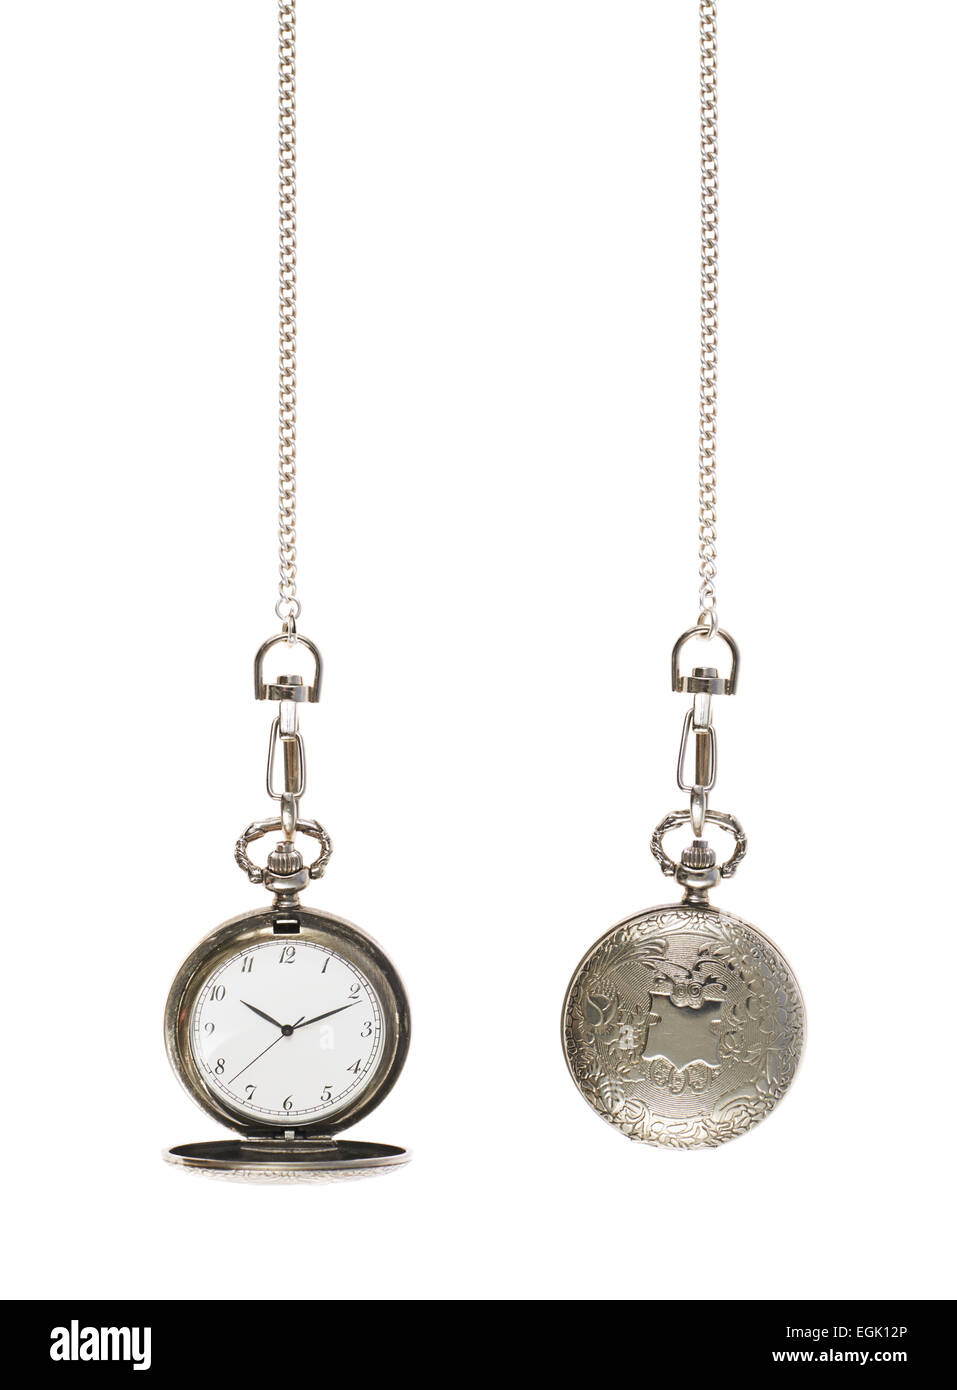 Closed and opened pocket watch Stock Photo - Alamy